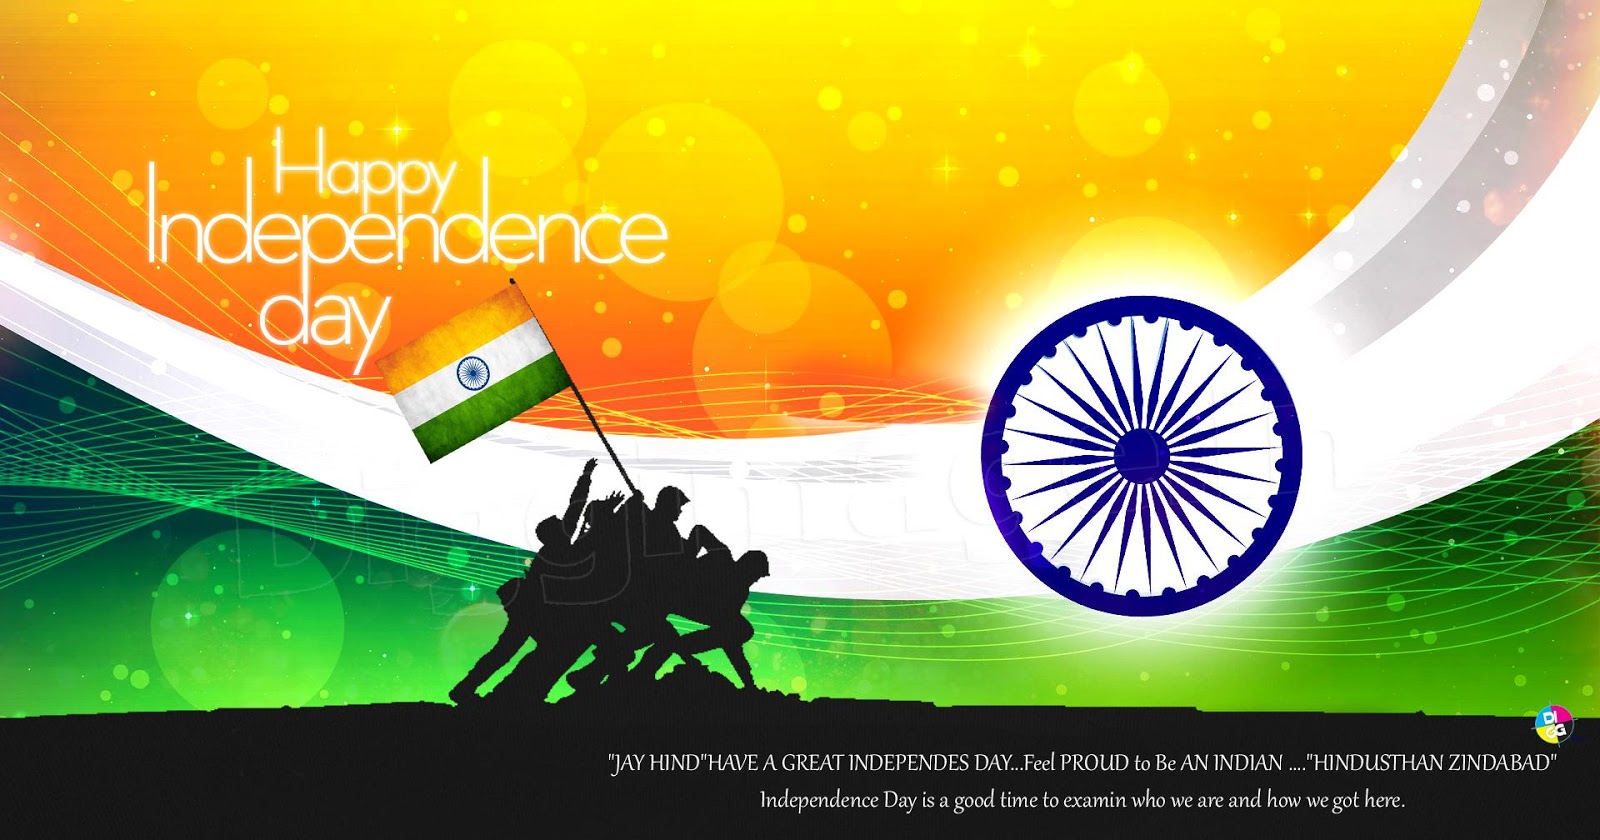 120 Most Beautiful Indian Independence Day 2018 Greeting Pictures And Images